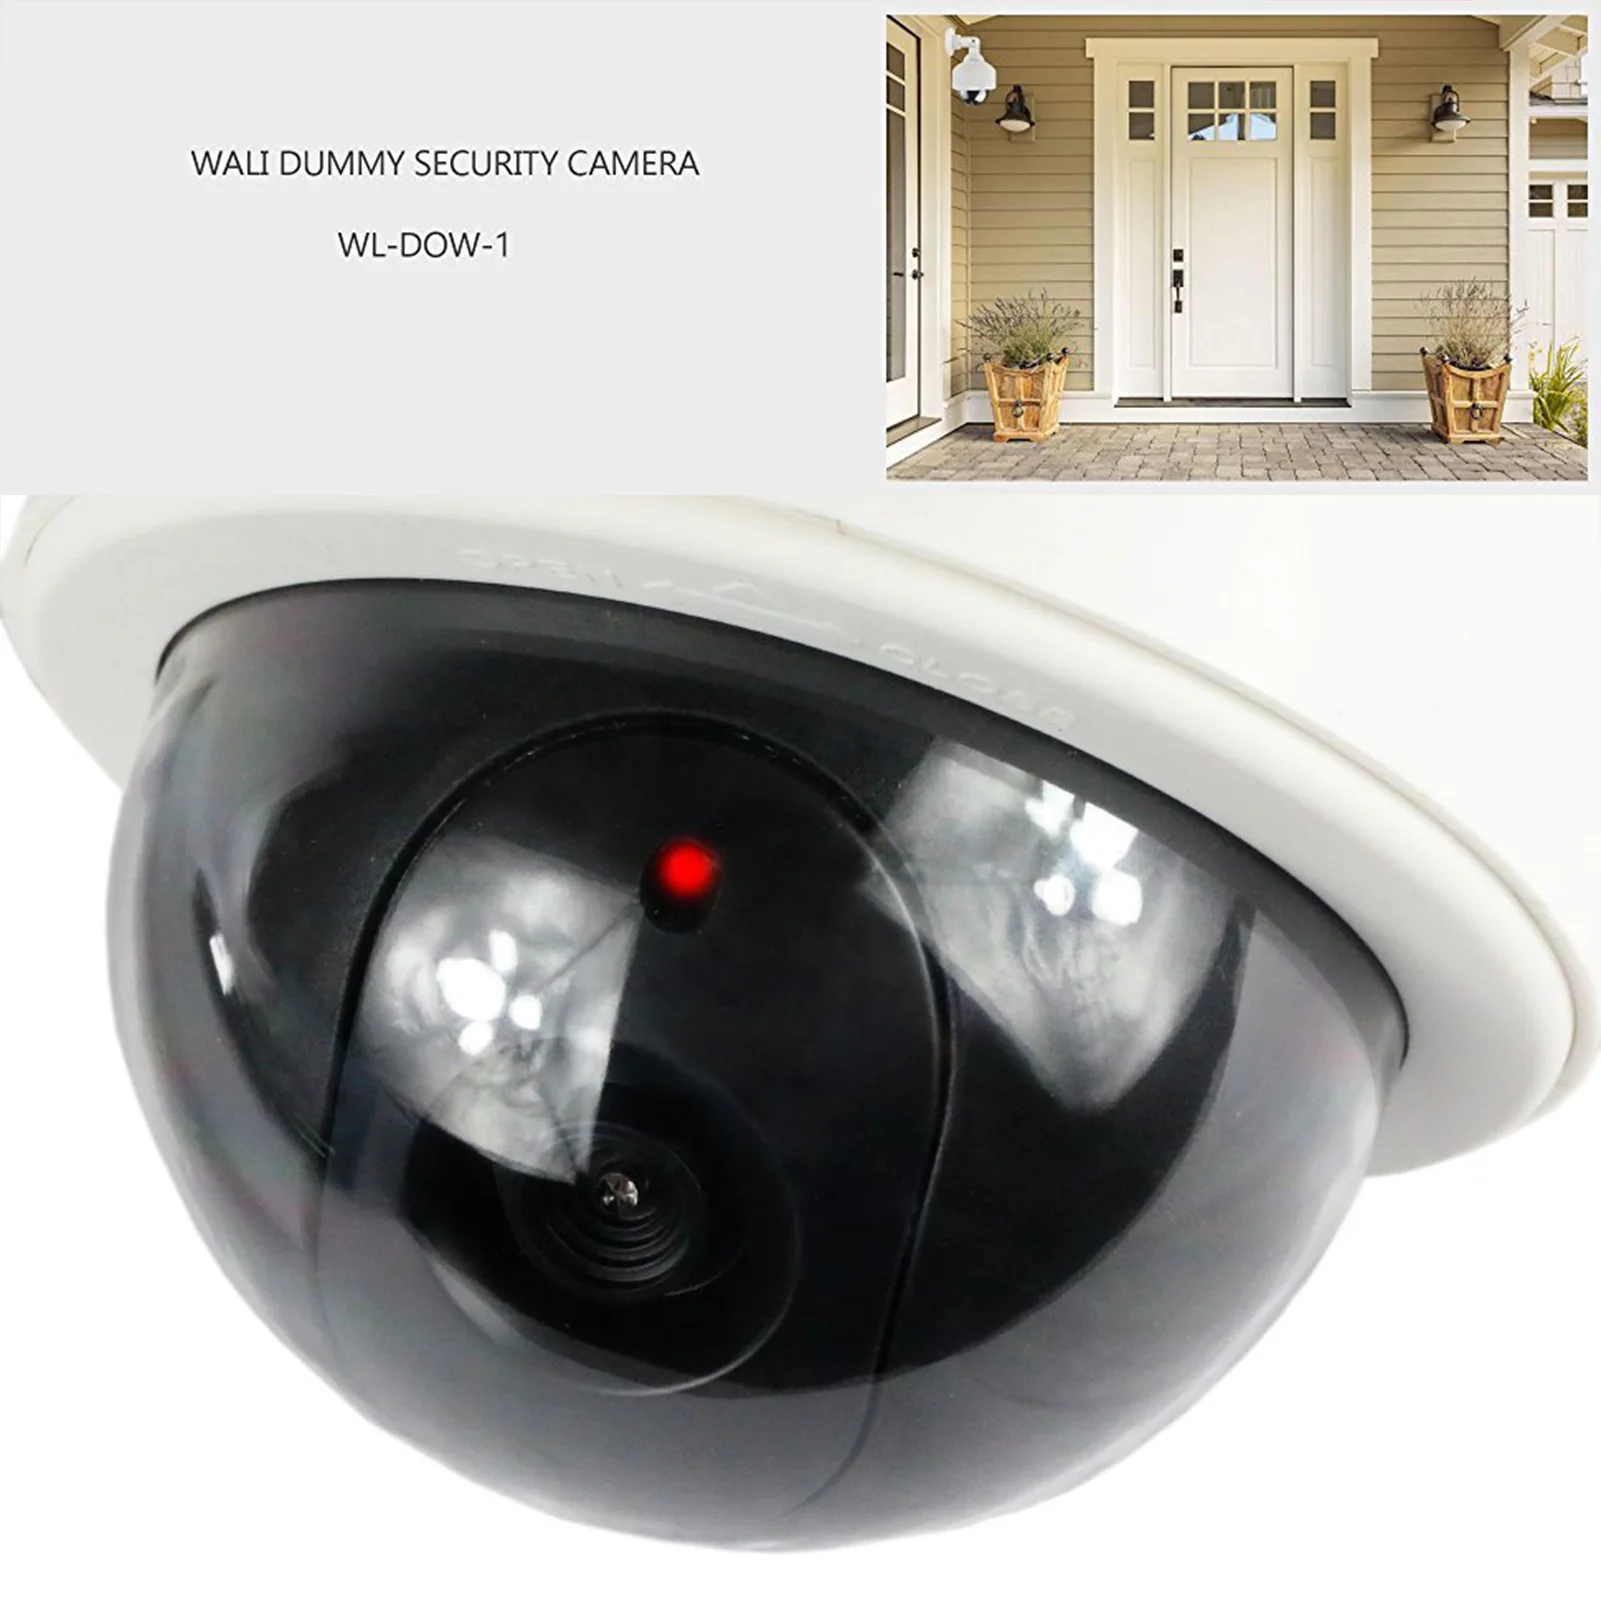 Professional Speed Dome Cameras with Lens Cable and Blinkled Video for Looking after Pets and Baby